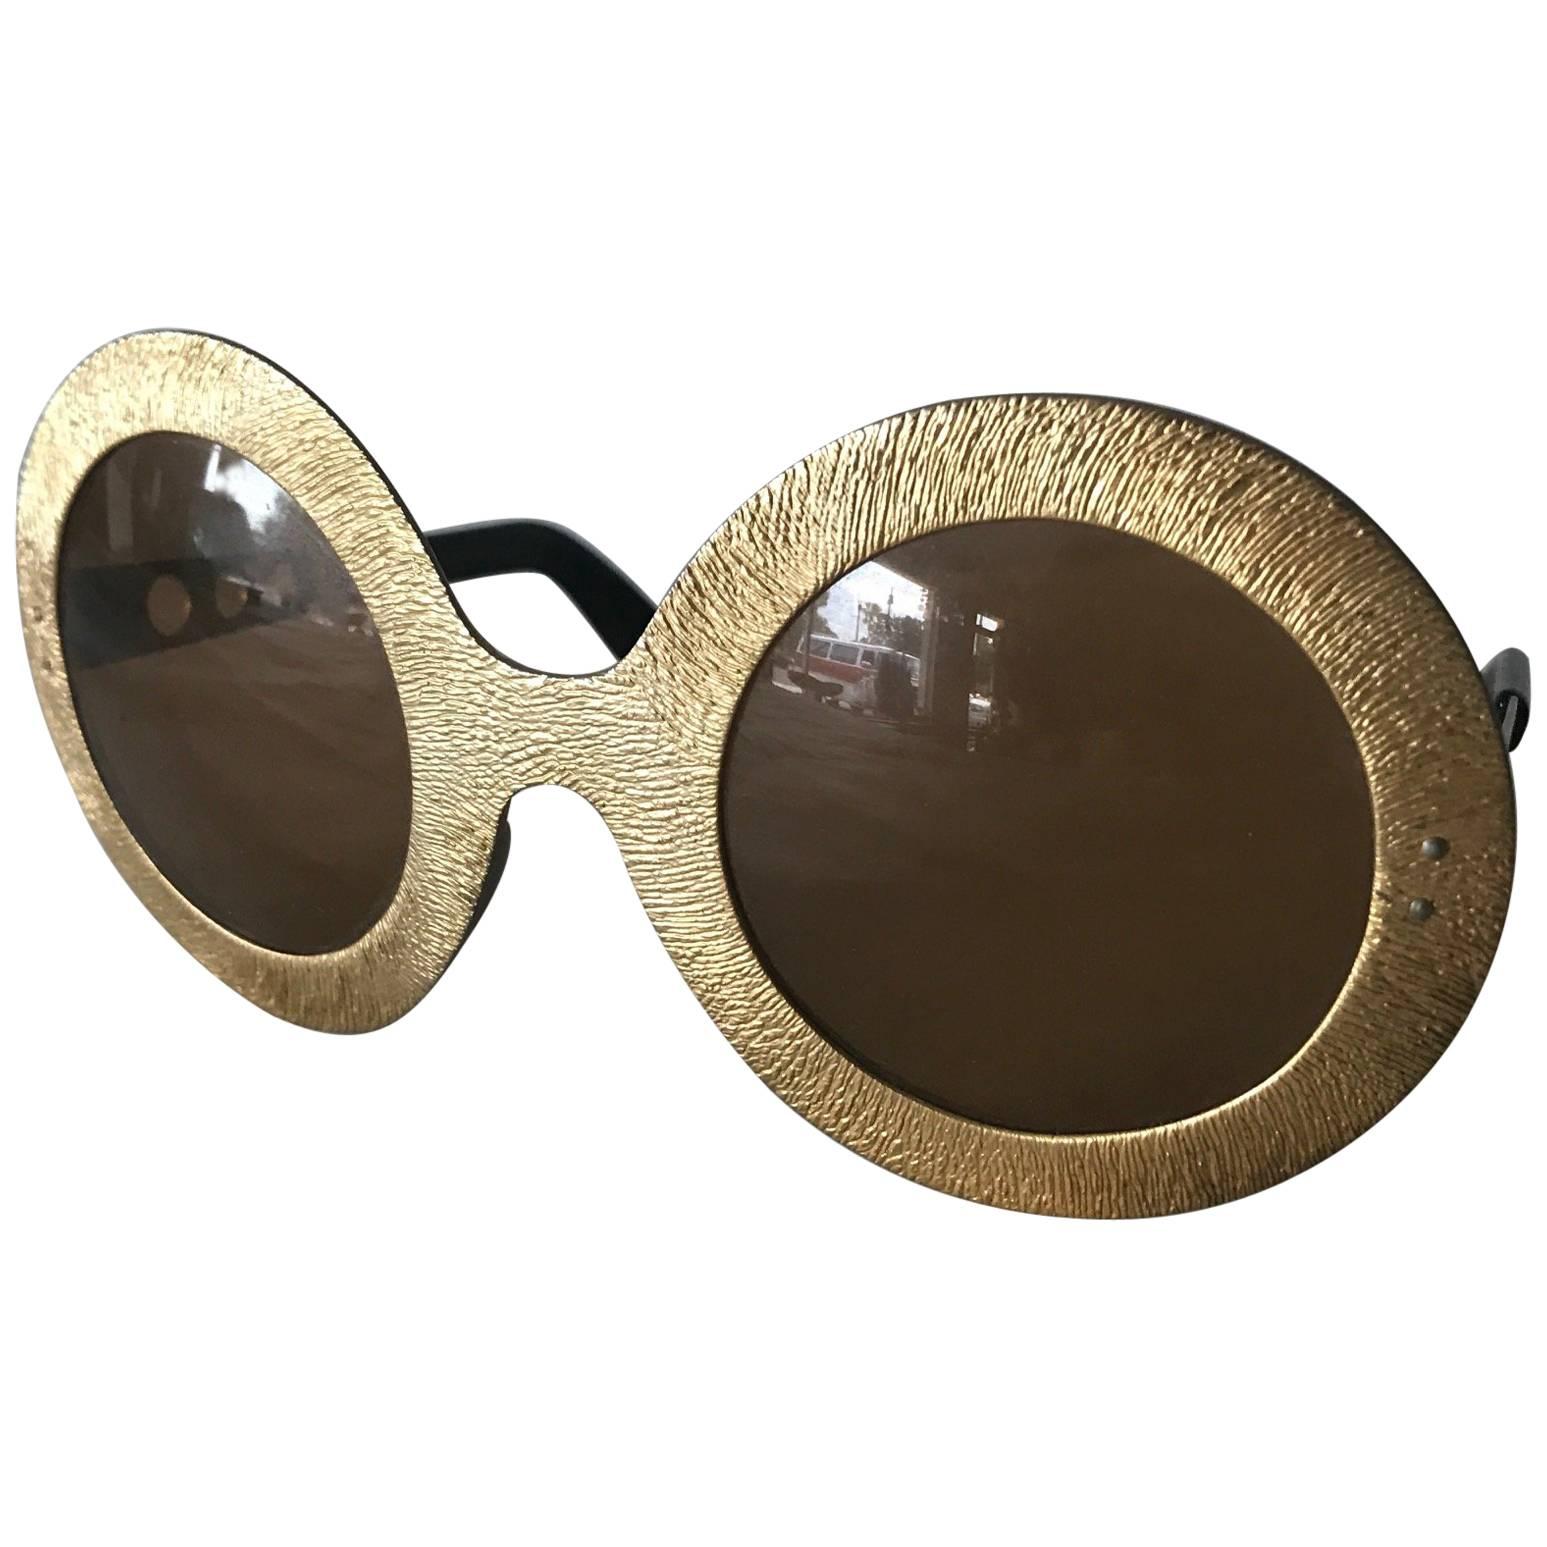 Pair of Vintage French 1970s Sunglasses